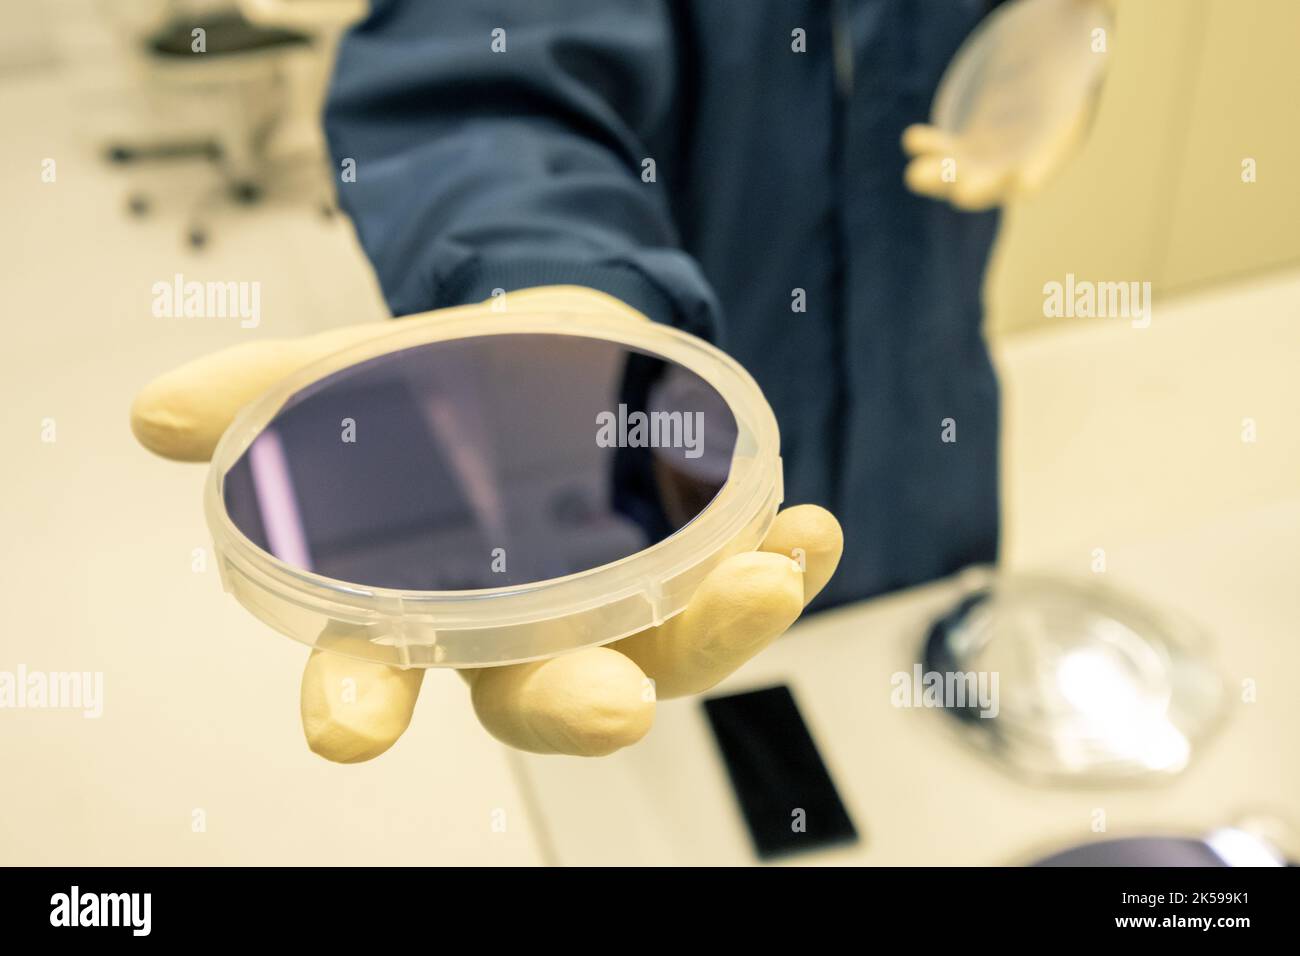 31.05.2022, Germany, Lower Saxony, Hannover - Laboratory for Nano- and Quantum Engineering (LNQE), interdisciplinary research center of Leibniz Univer Stock Photo